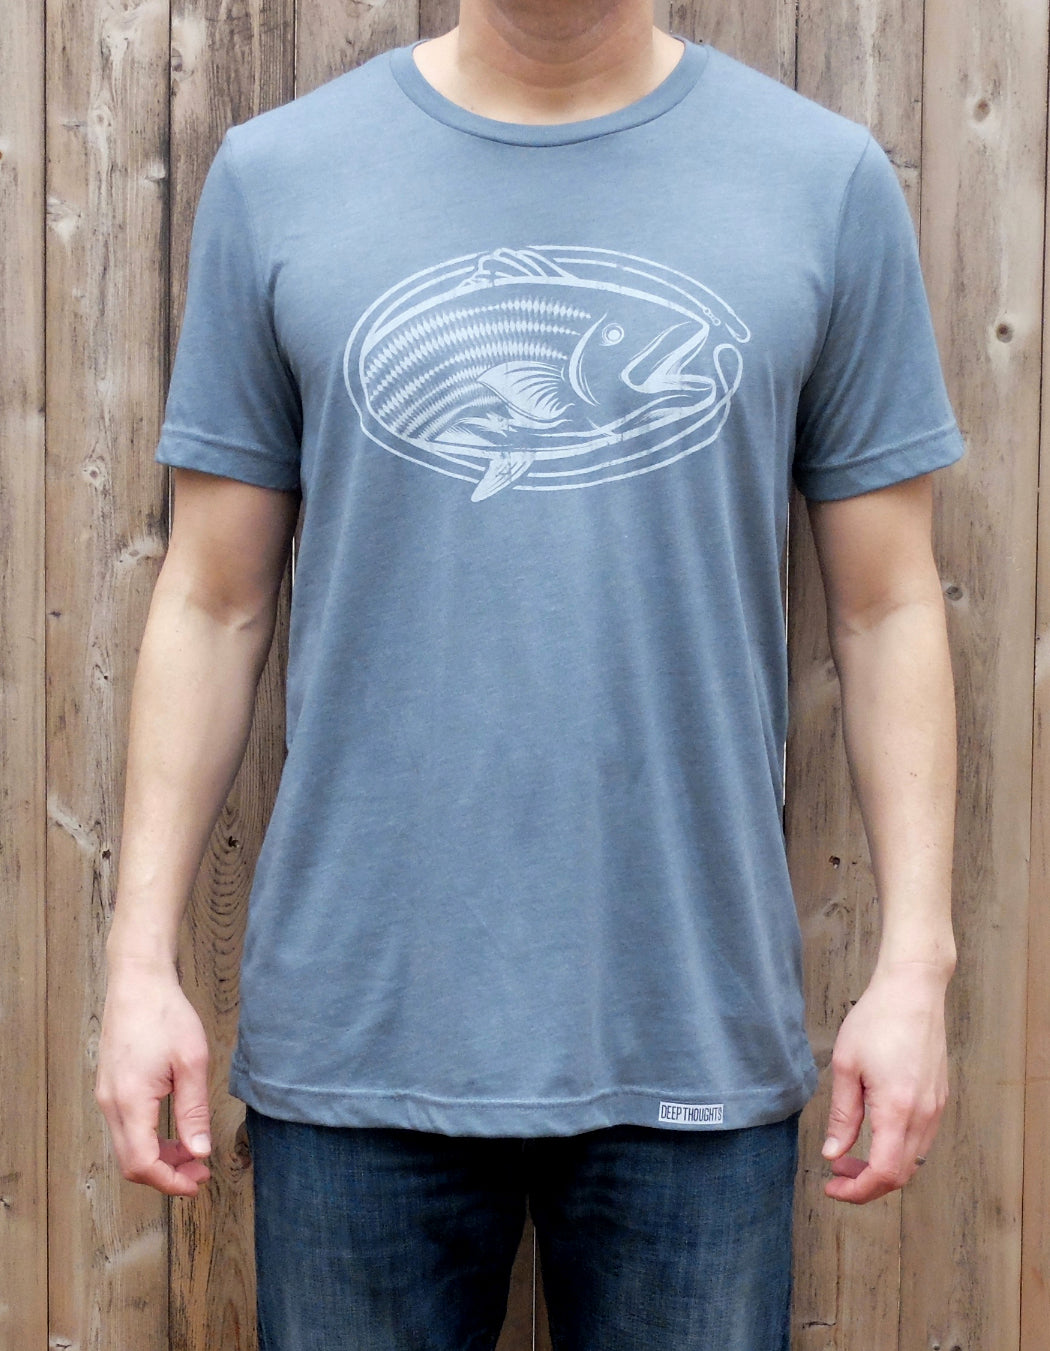 man wearing heather slate blue t-shirt with white oval-shaped striped bass fishing graphic